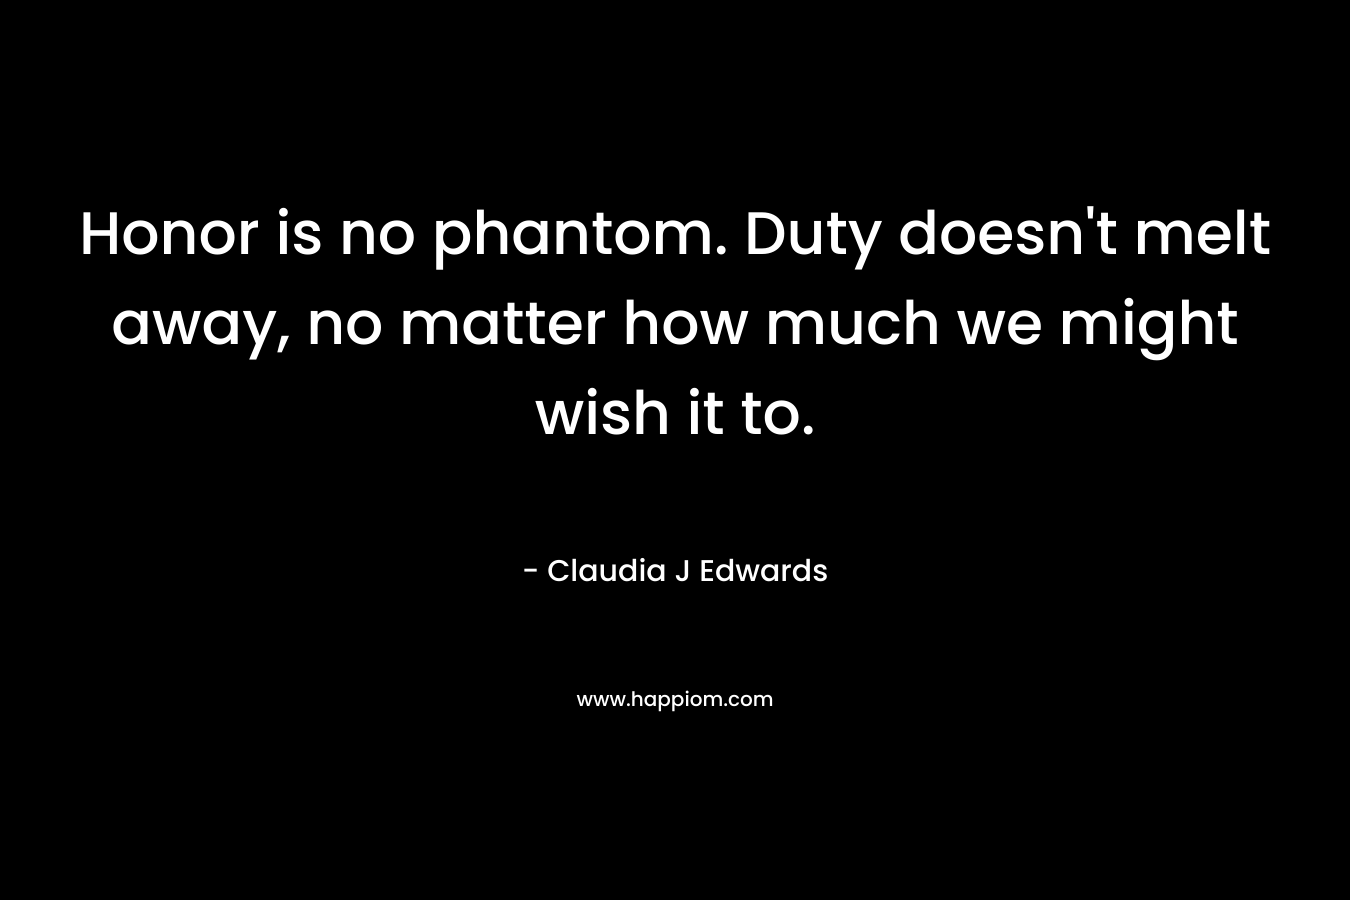 Honor is no phantom. Duty doesn’t melt away, no matter how much we might wish it to. – Claudia J Edwards